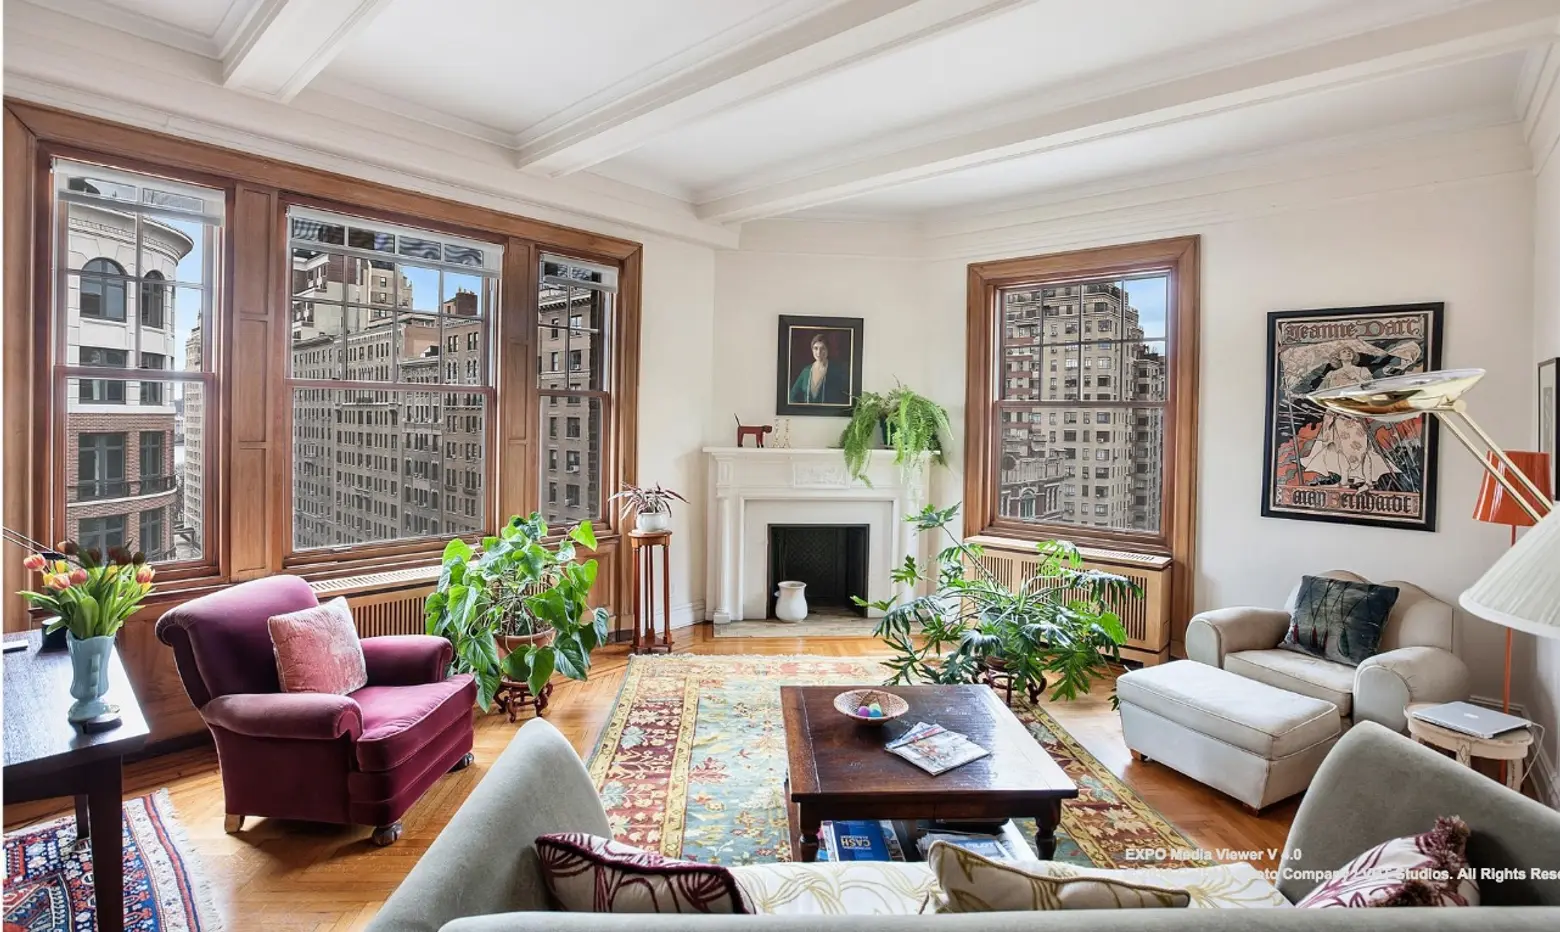 $1.5M 10th Floor Co-Op Comes With Fantastic Views of Upper West Side Landmarks